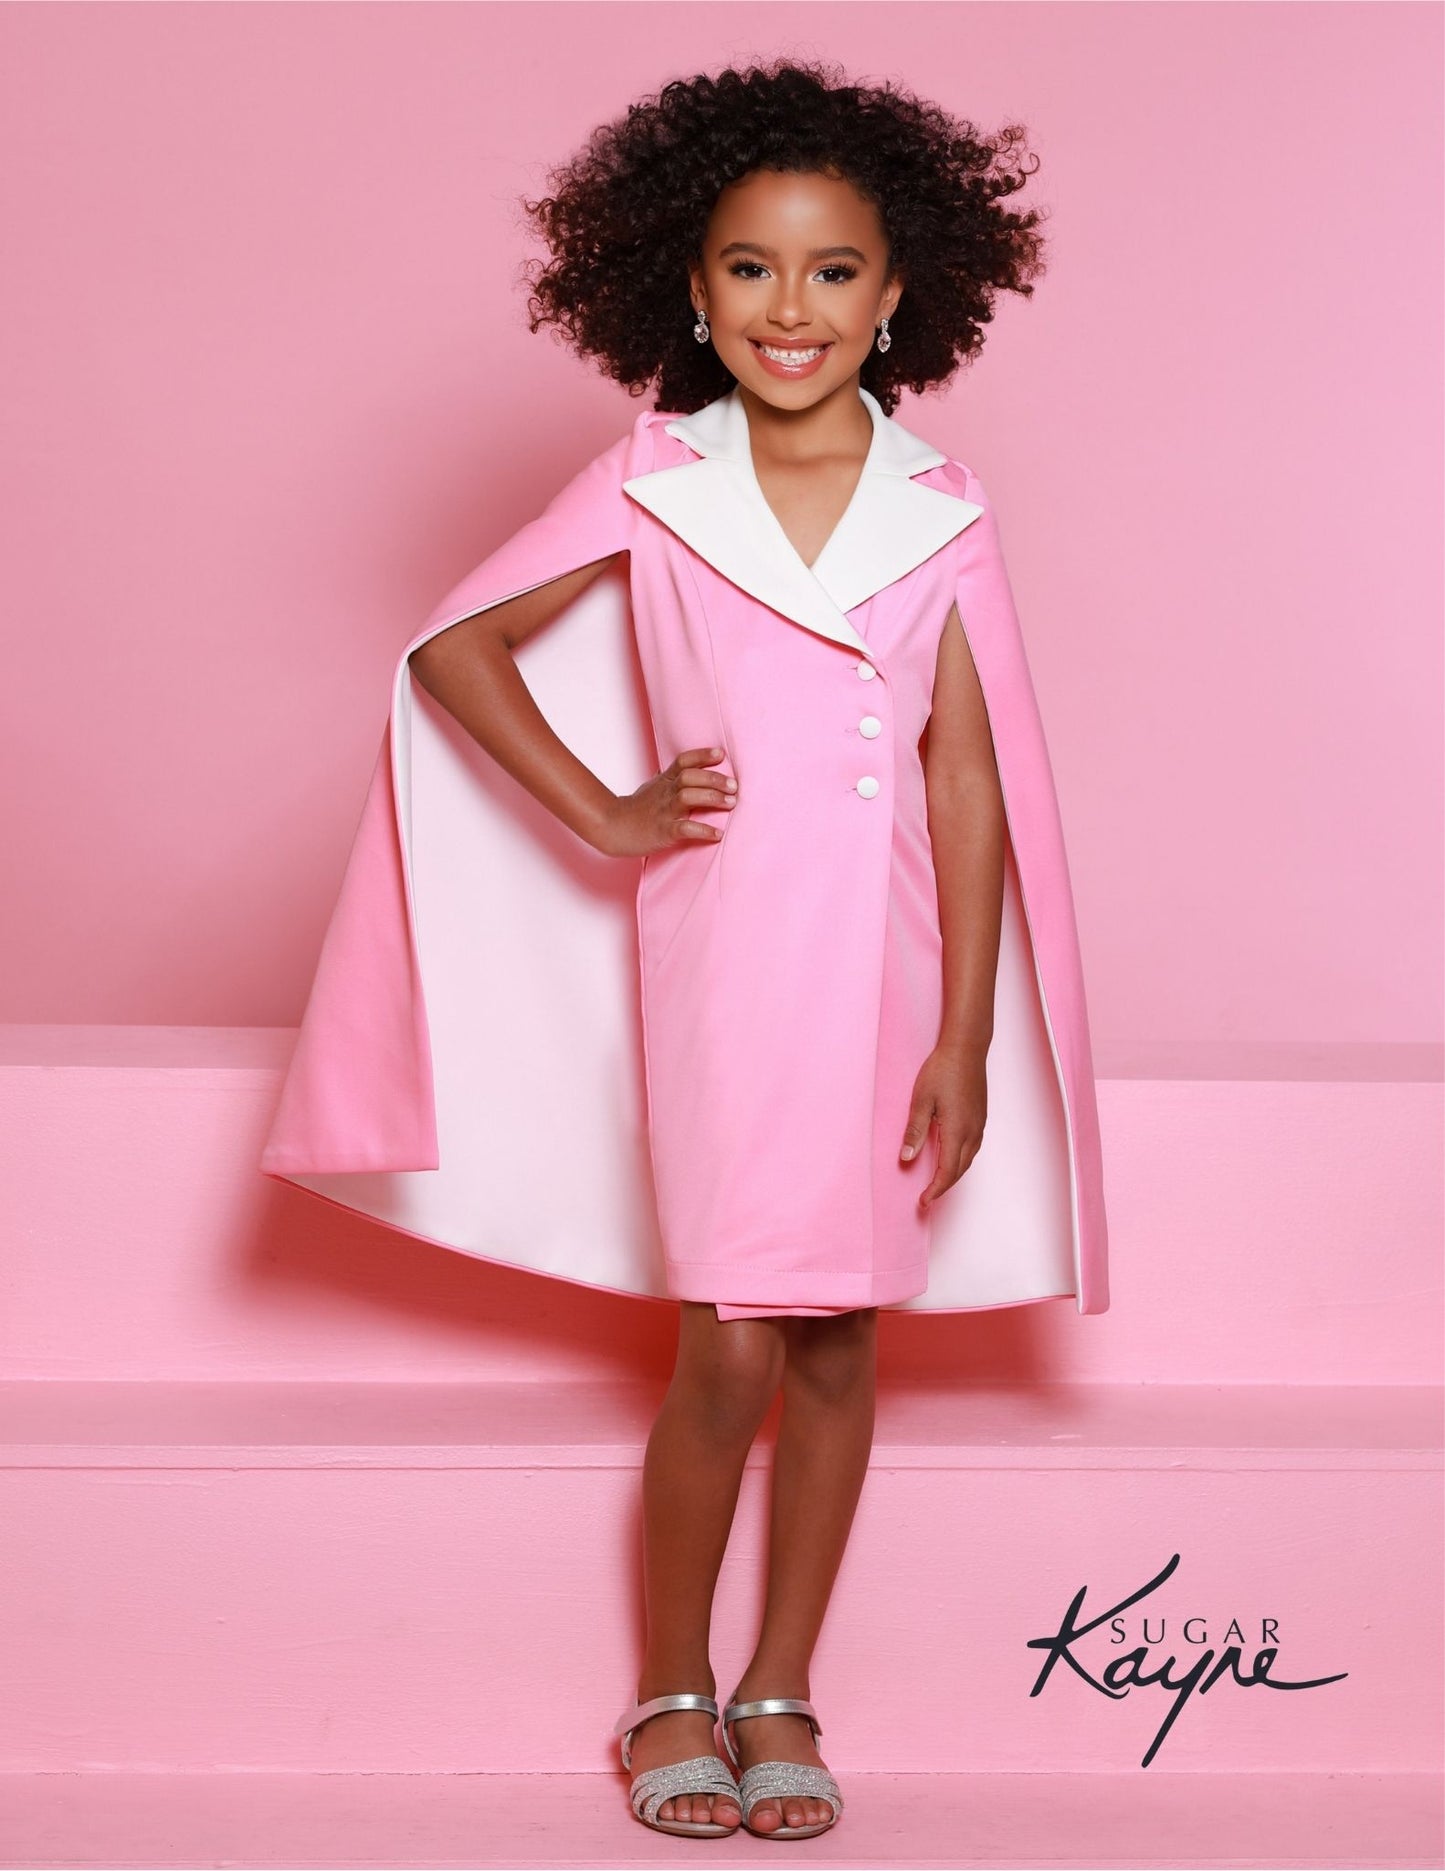 Sugar Kayne c333 Girls buttoned caped short dress with capelet